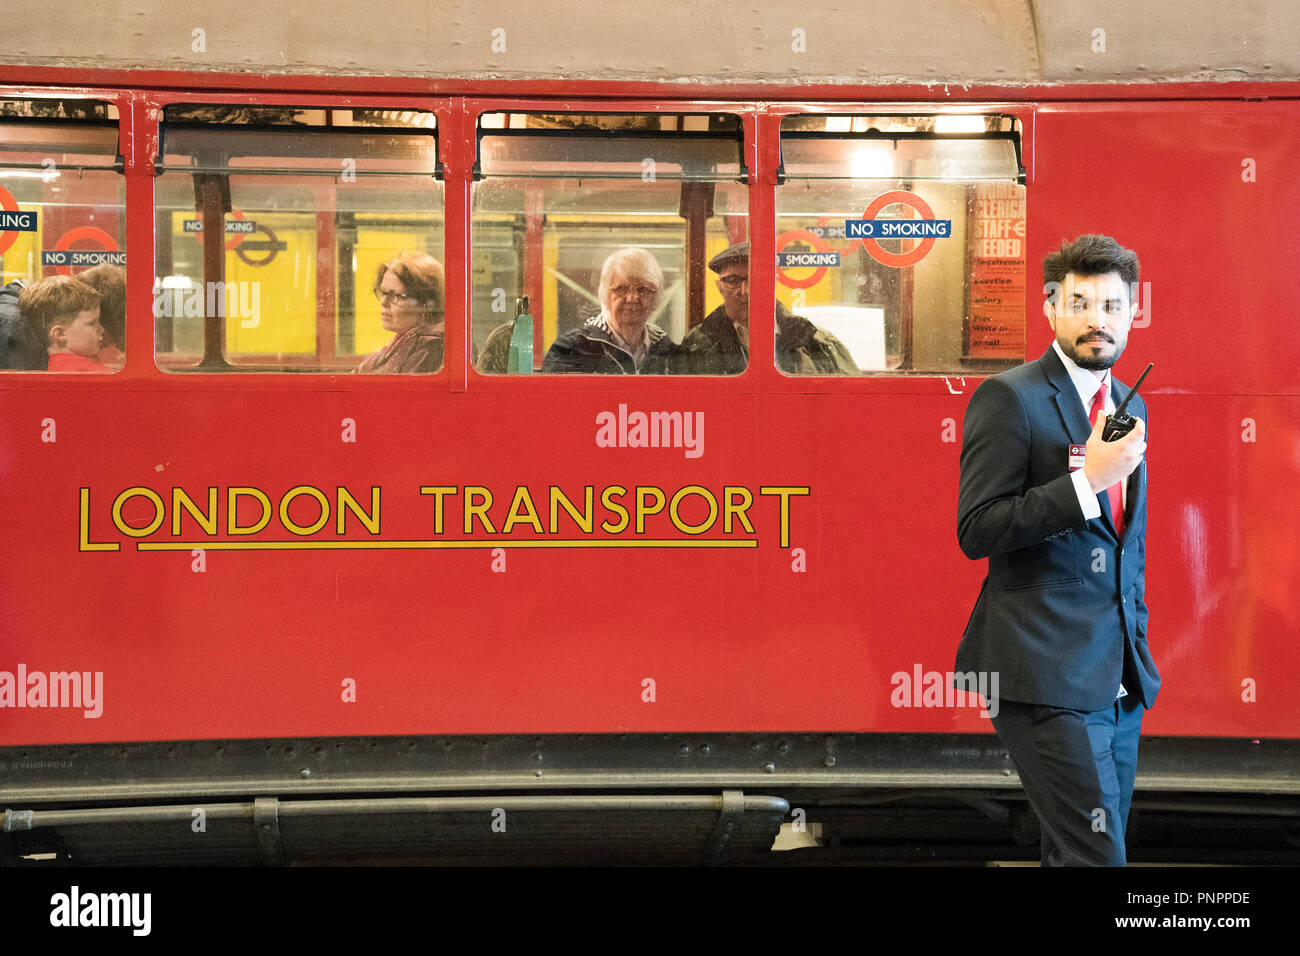 Scenes from the London Transport Museum Depot, which opens its doors to the public twice a year. Photo date: Saturday, September 22, 2018. Photo: Roger Garfield/Alamy Live News Stock Photo